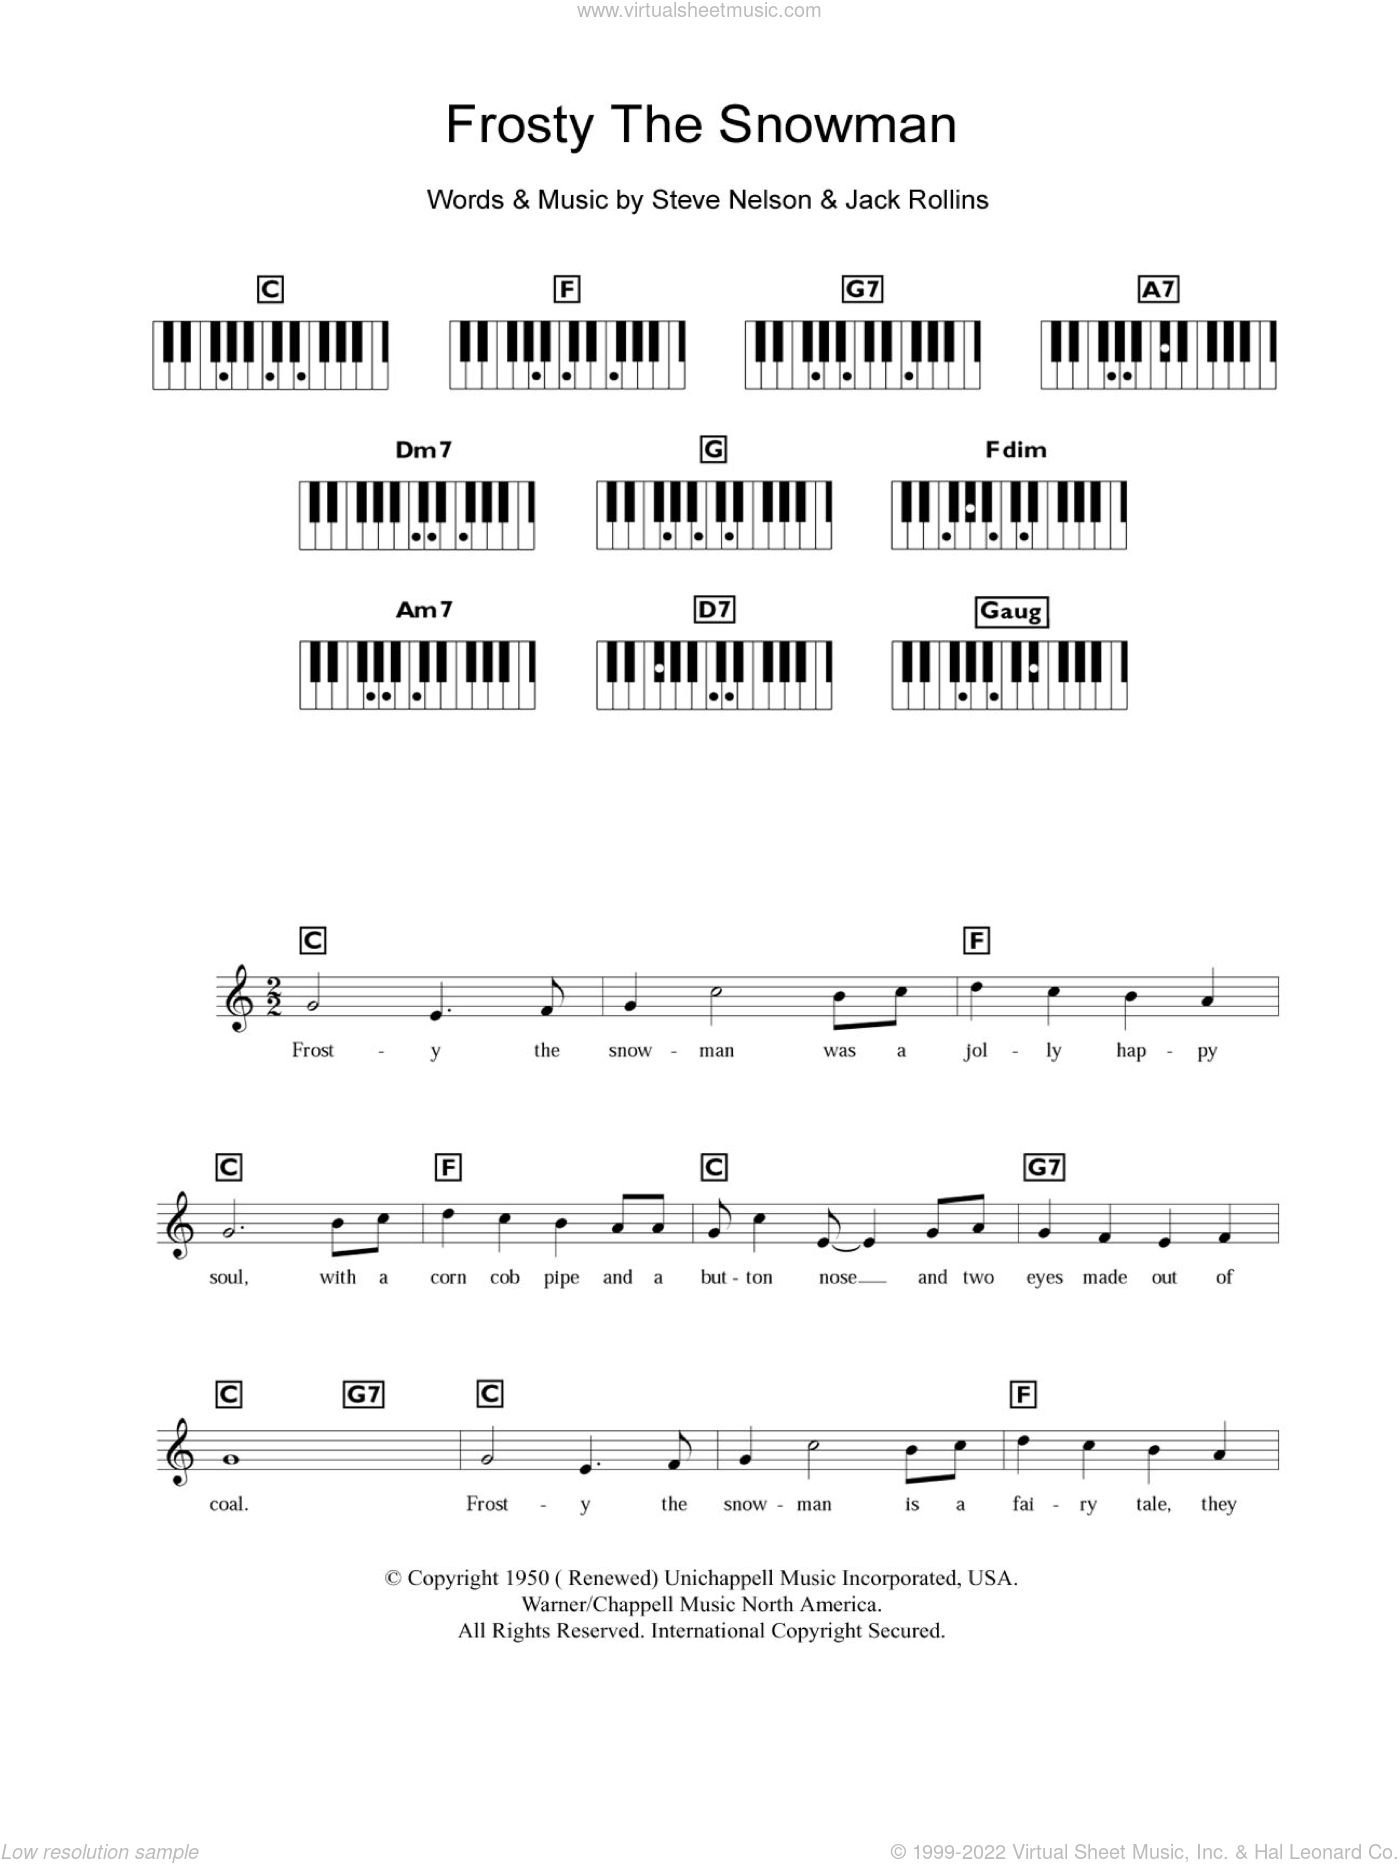 frosty the snowman chords